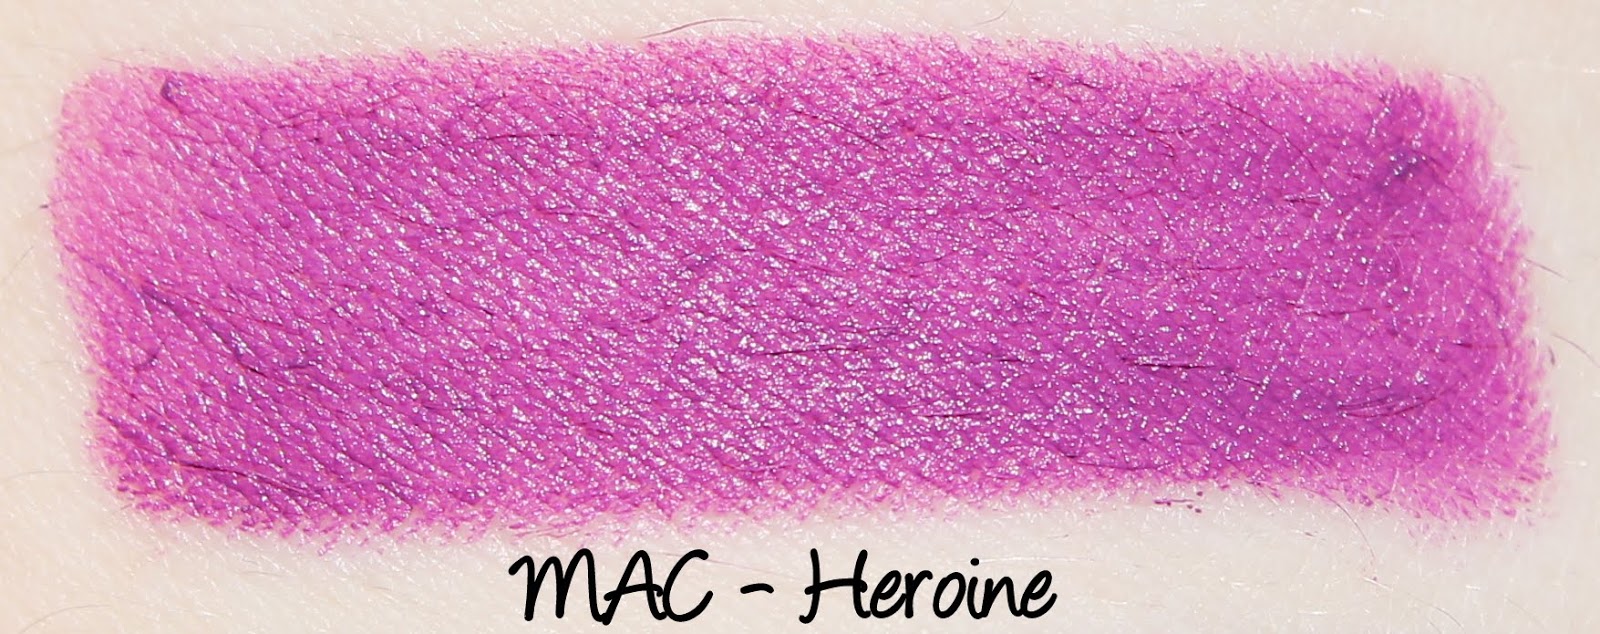 MAC Heroine Lipstick Swatches & Review